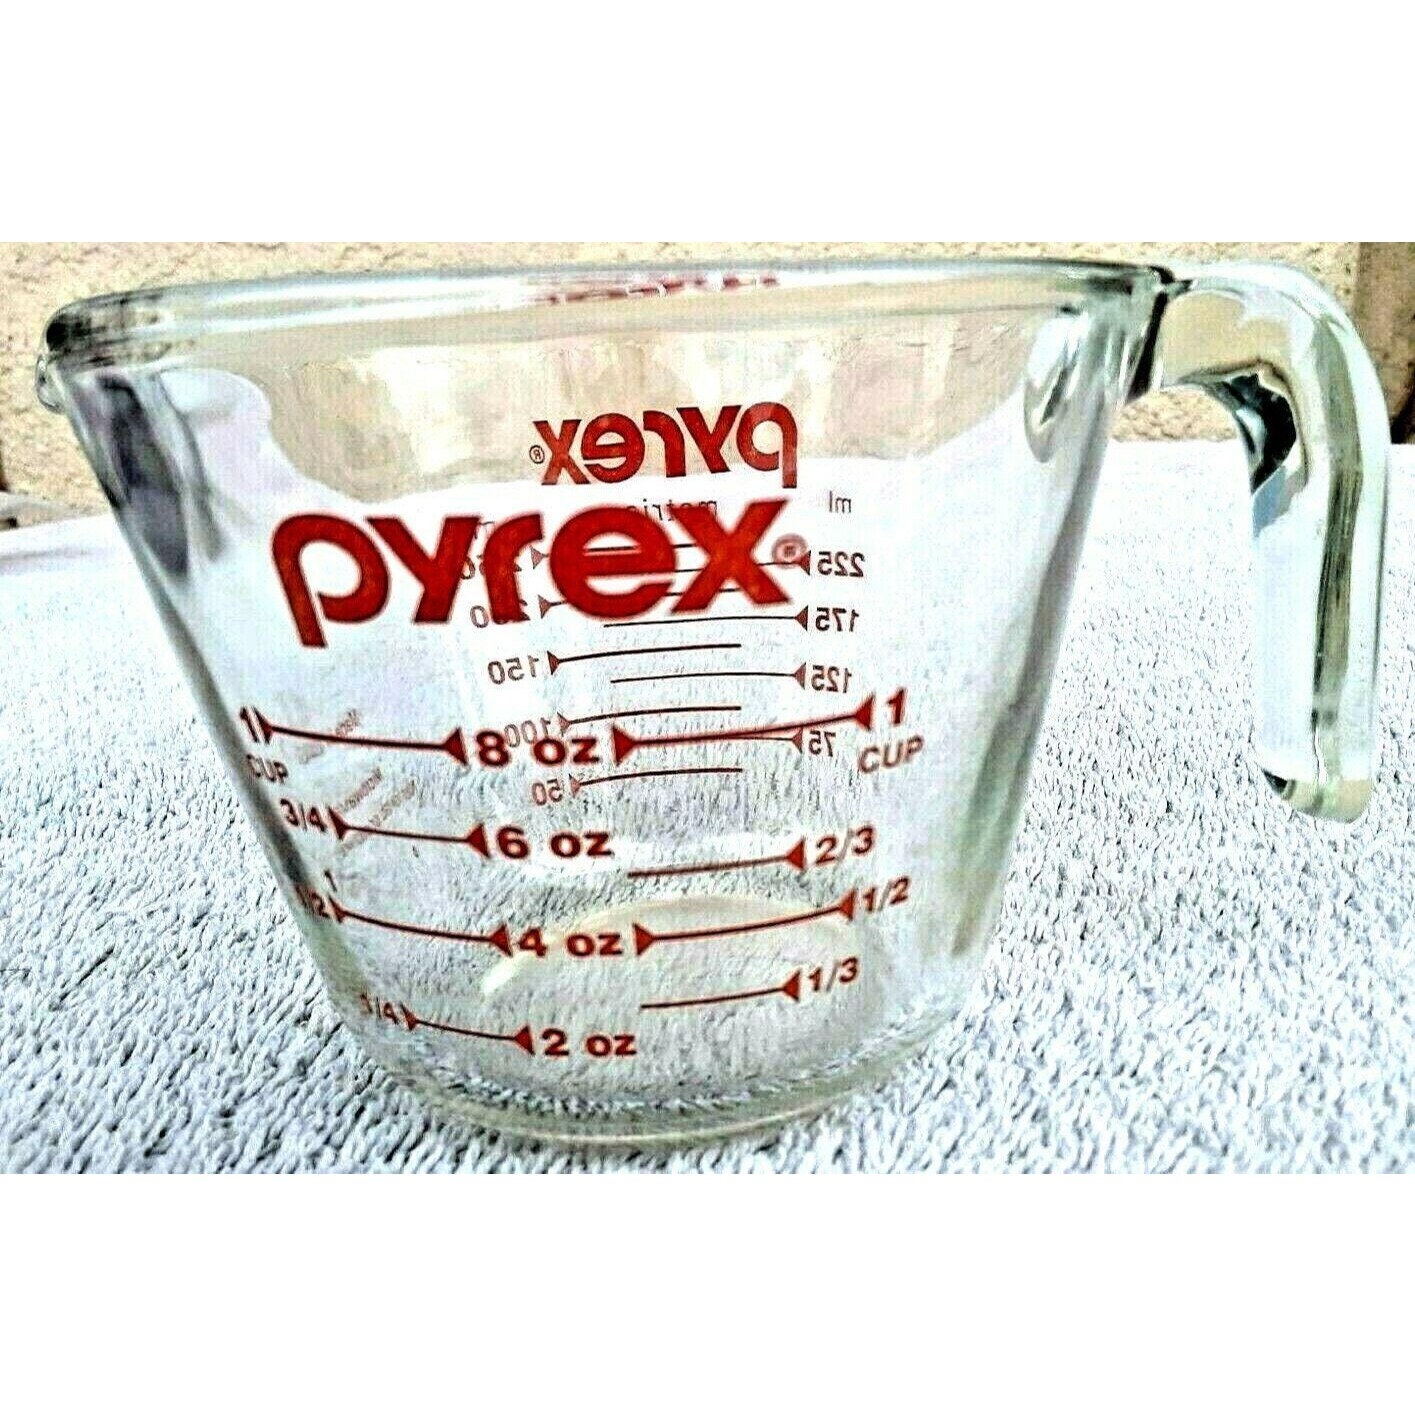 Pyrex Prepware 2 Cup Glass Measuring Cup with Lid Red Letters Made in USA